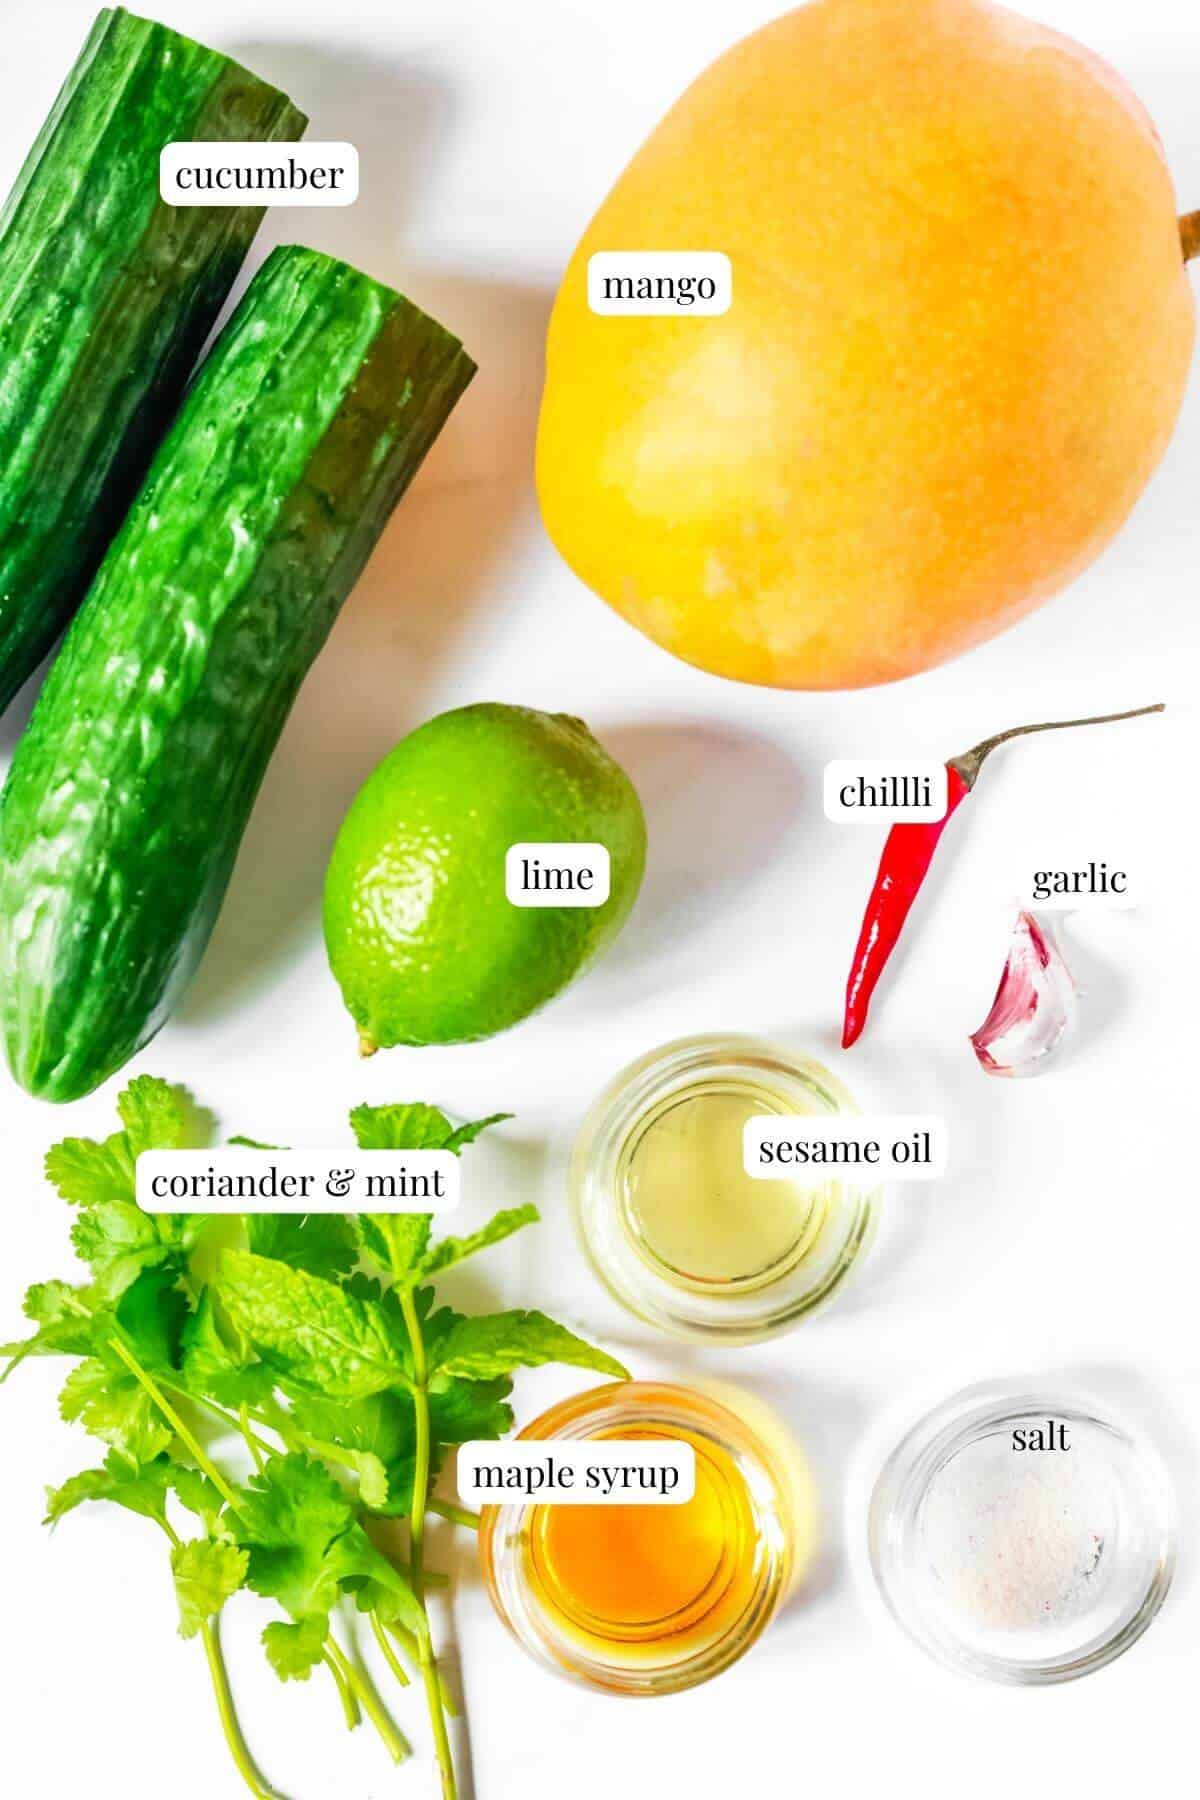 Labelled ingredients for a mango and cucumber salad laying on a white surface.